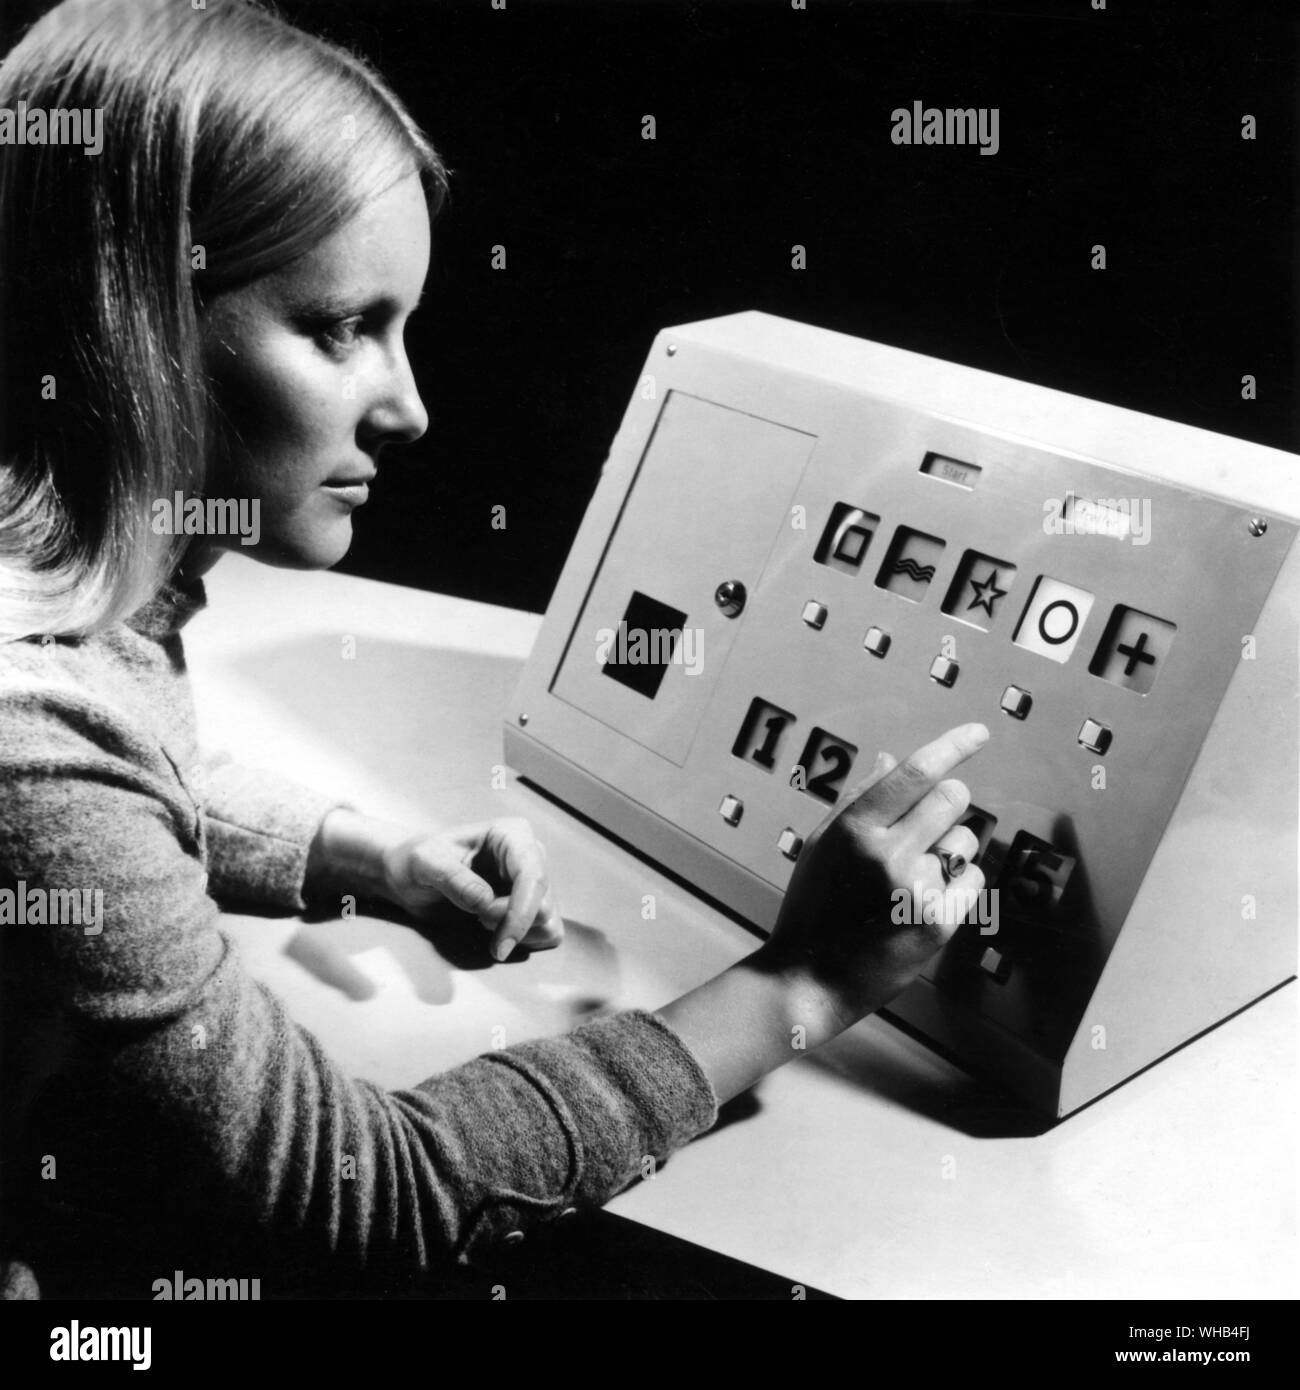 Prismaton-70 machine used in Germany to test for extra-sensory perception. Stock Photo